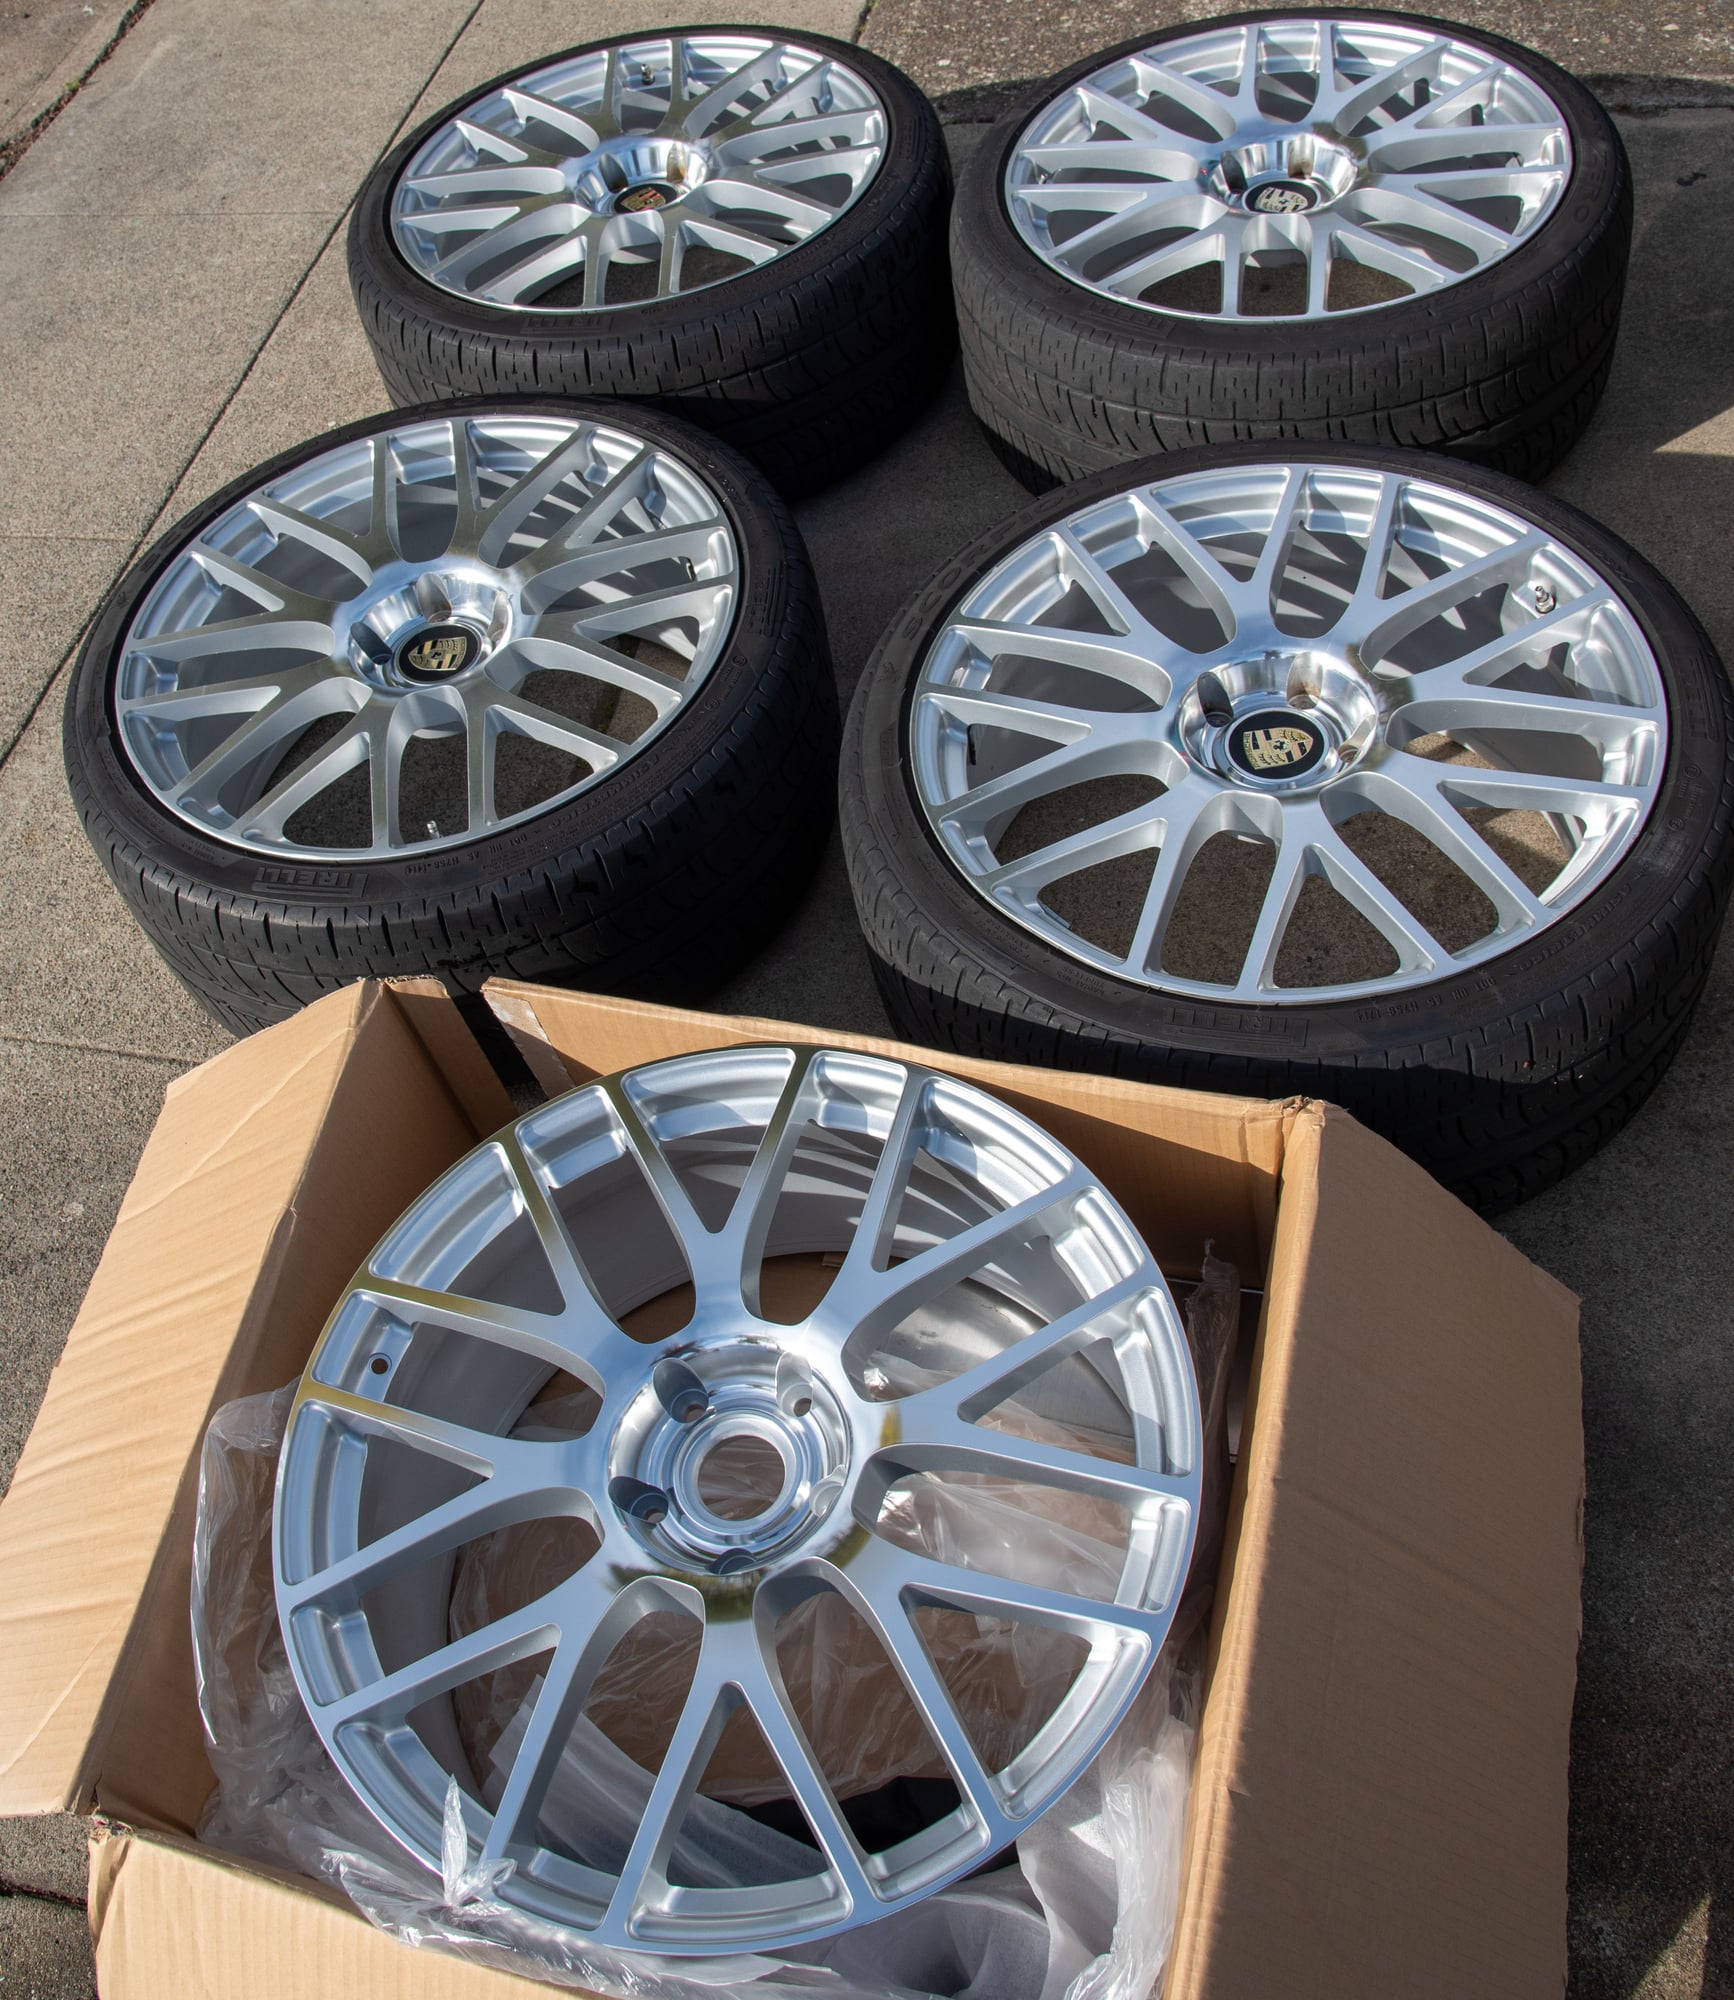 Wheels and Tires/Axles - 5 Victor Innsbruck 22" x 10.5" Wheels (4 worn tires optional) - Used - 2011 to 2018 Porsche Cayenne - San Jose, CA 95130, United States